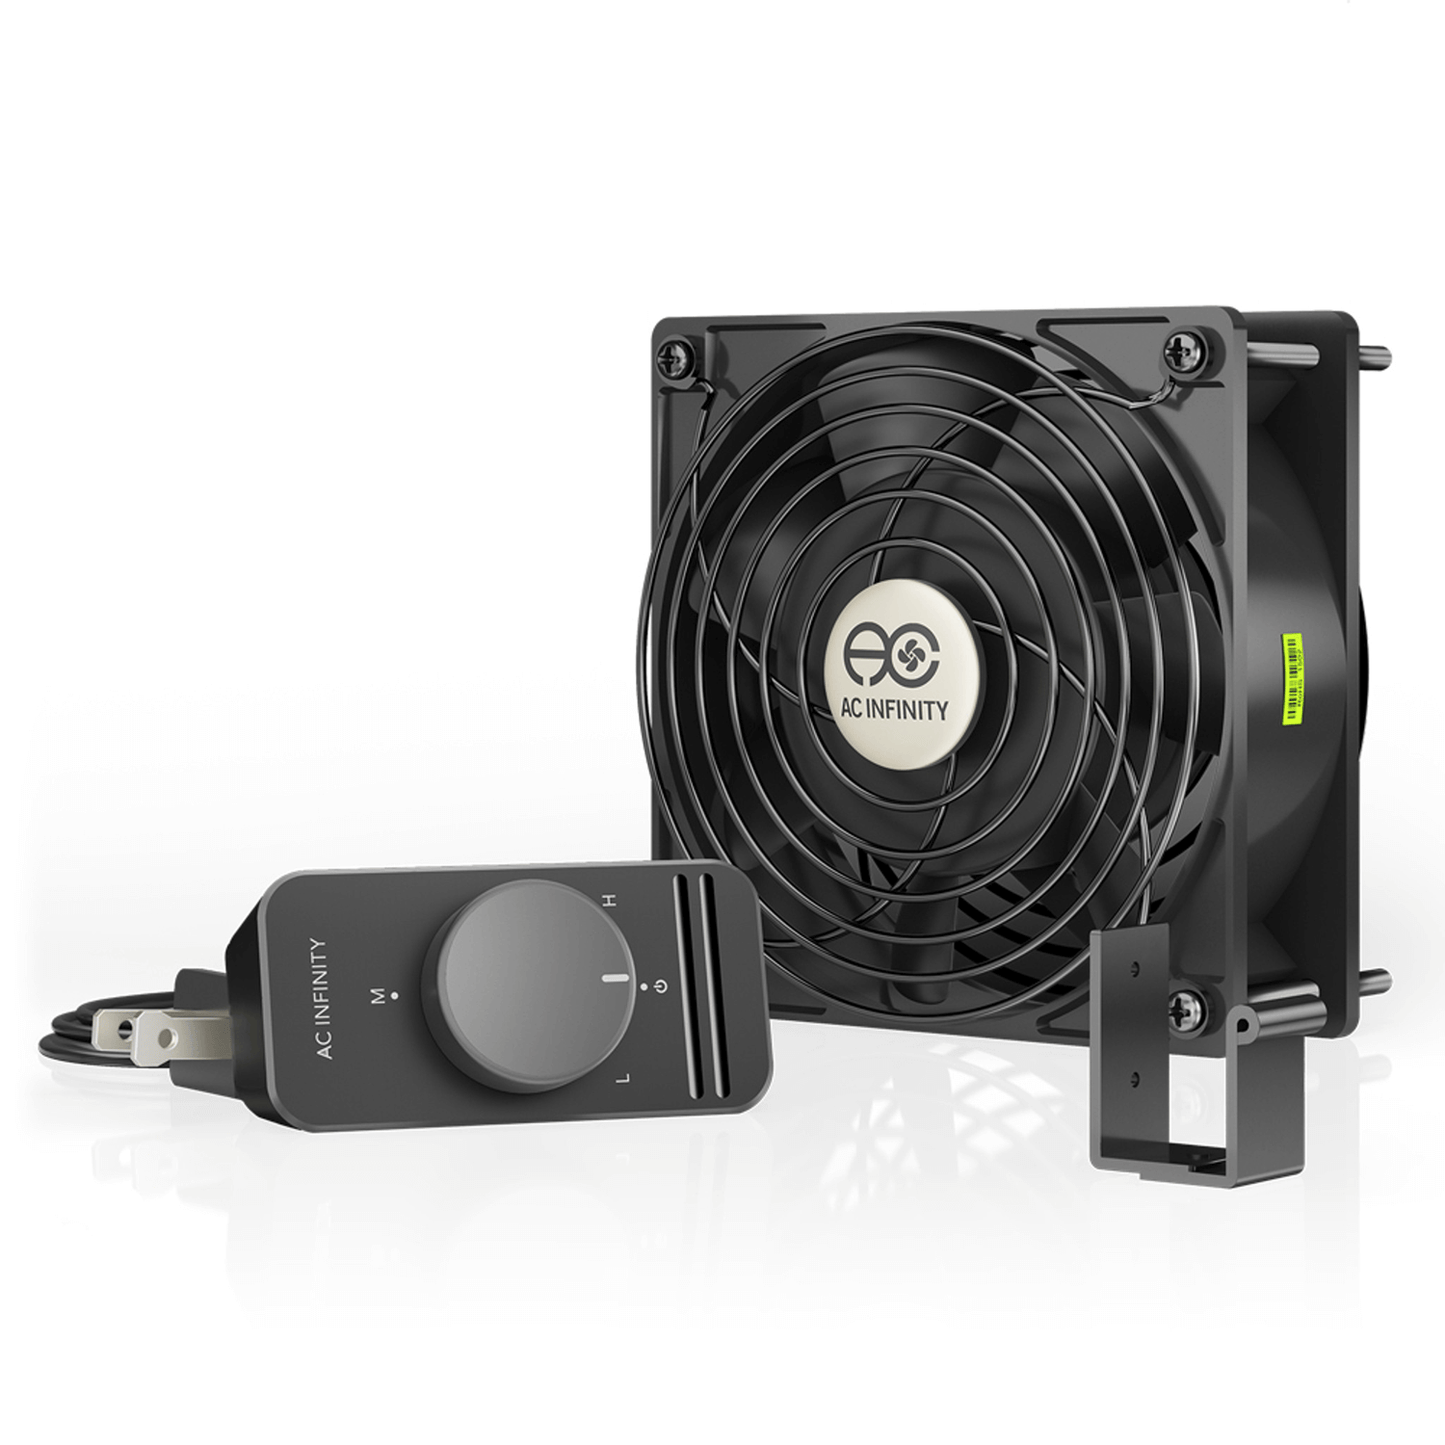 AC Infinity AXIAL S1238, Muffin 120V AC Cooling Fan, 120mm x 120mm x 38mm AI-1238SCX Climate Control 819137020078